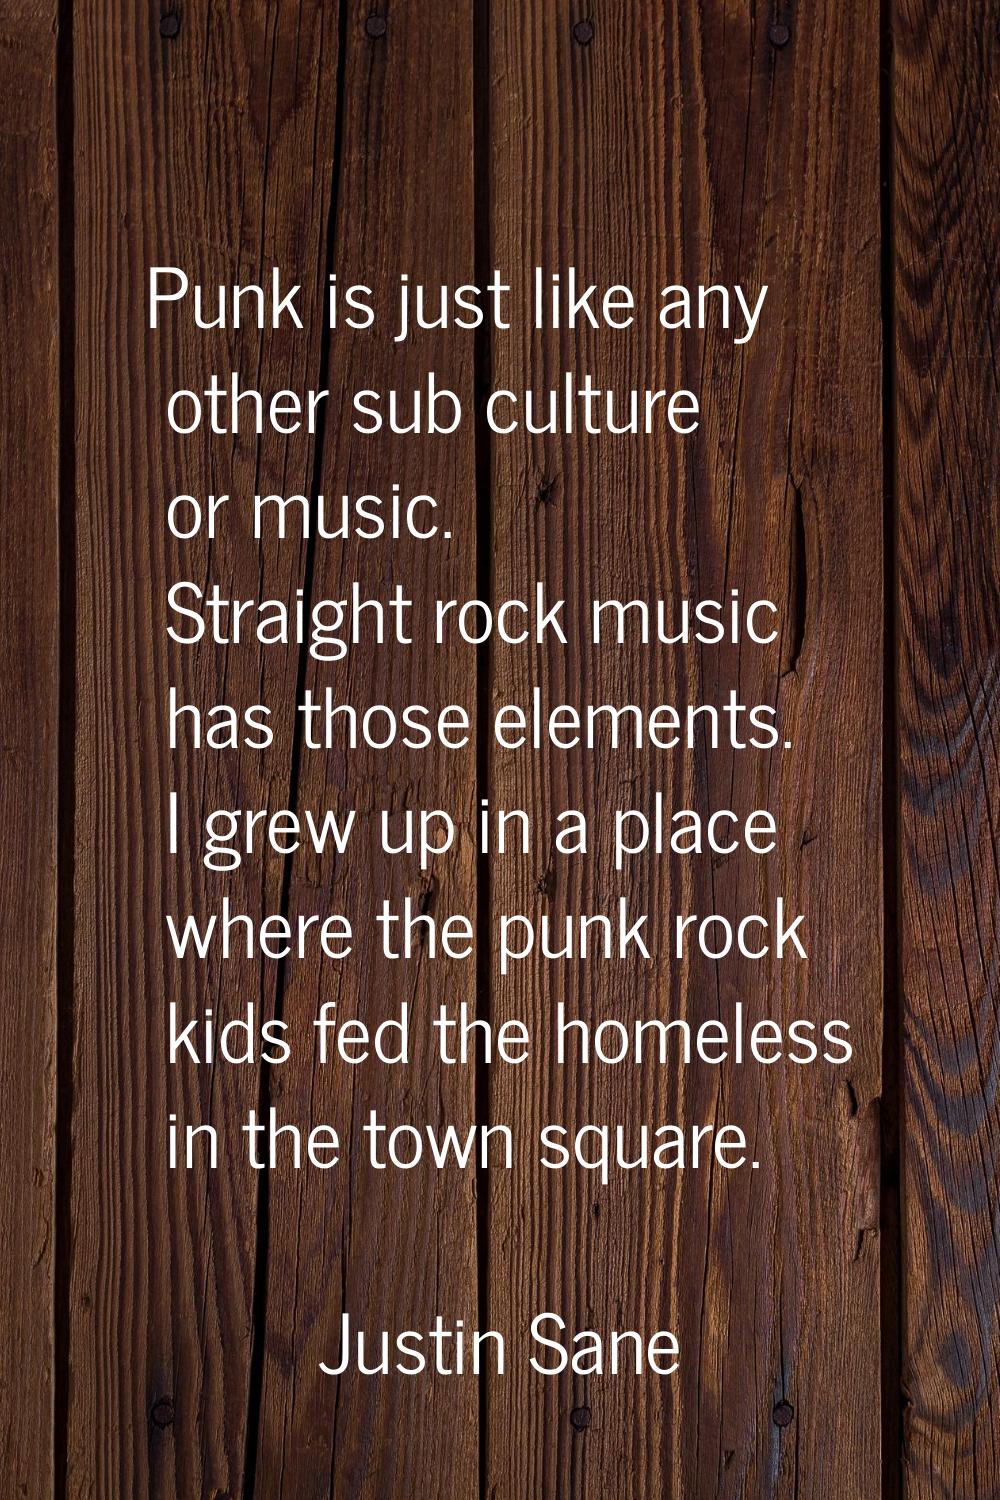 Punk is just like any other sub culture or music. Straight rock music has those elements. I grew up